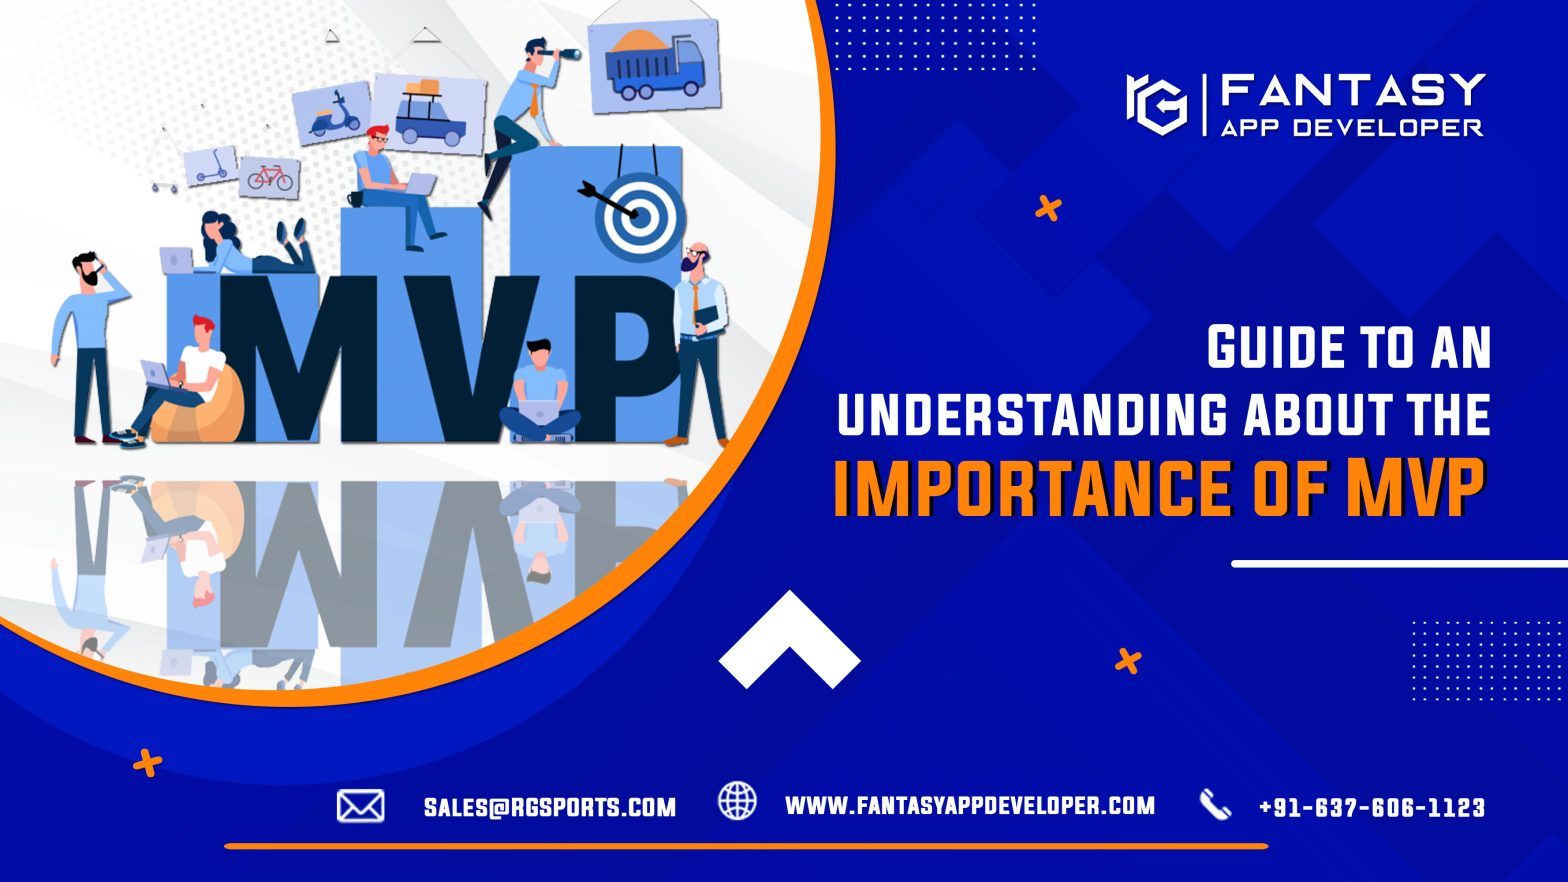 Guide to an understanding of the importance of MVP